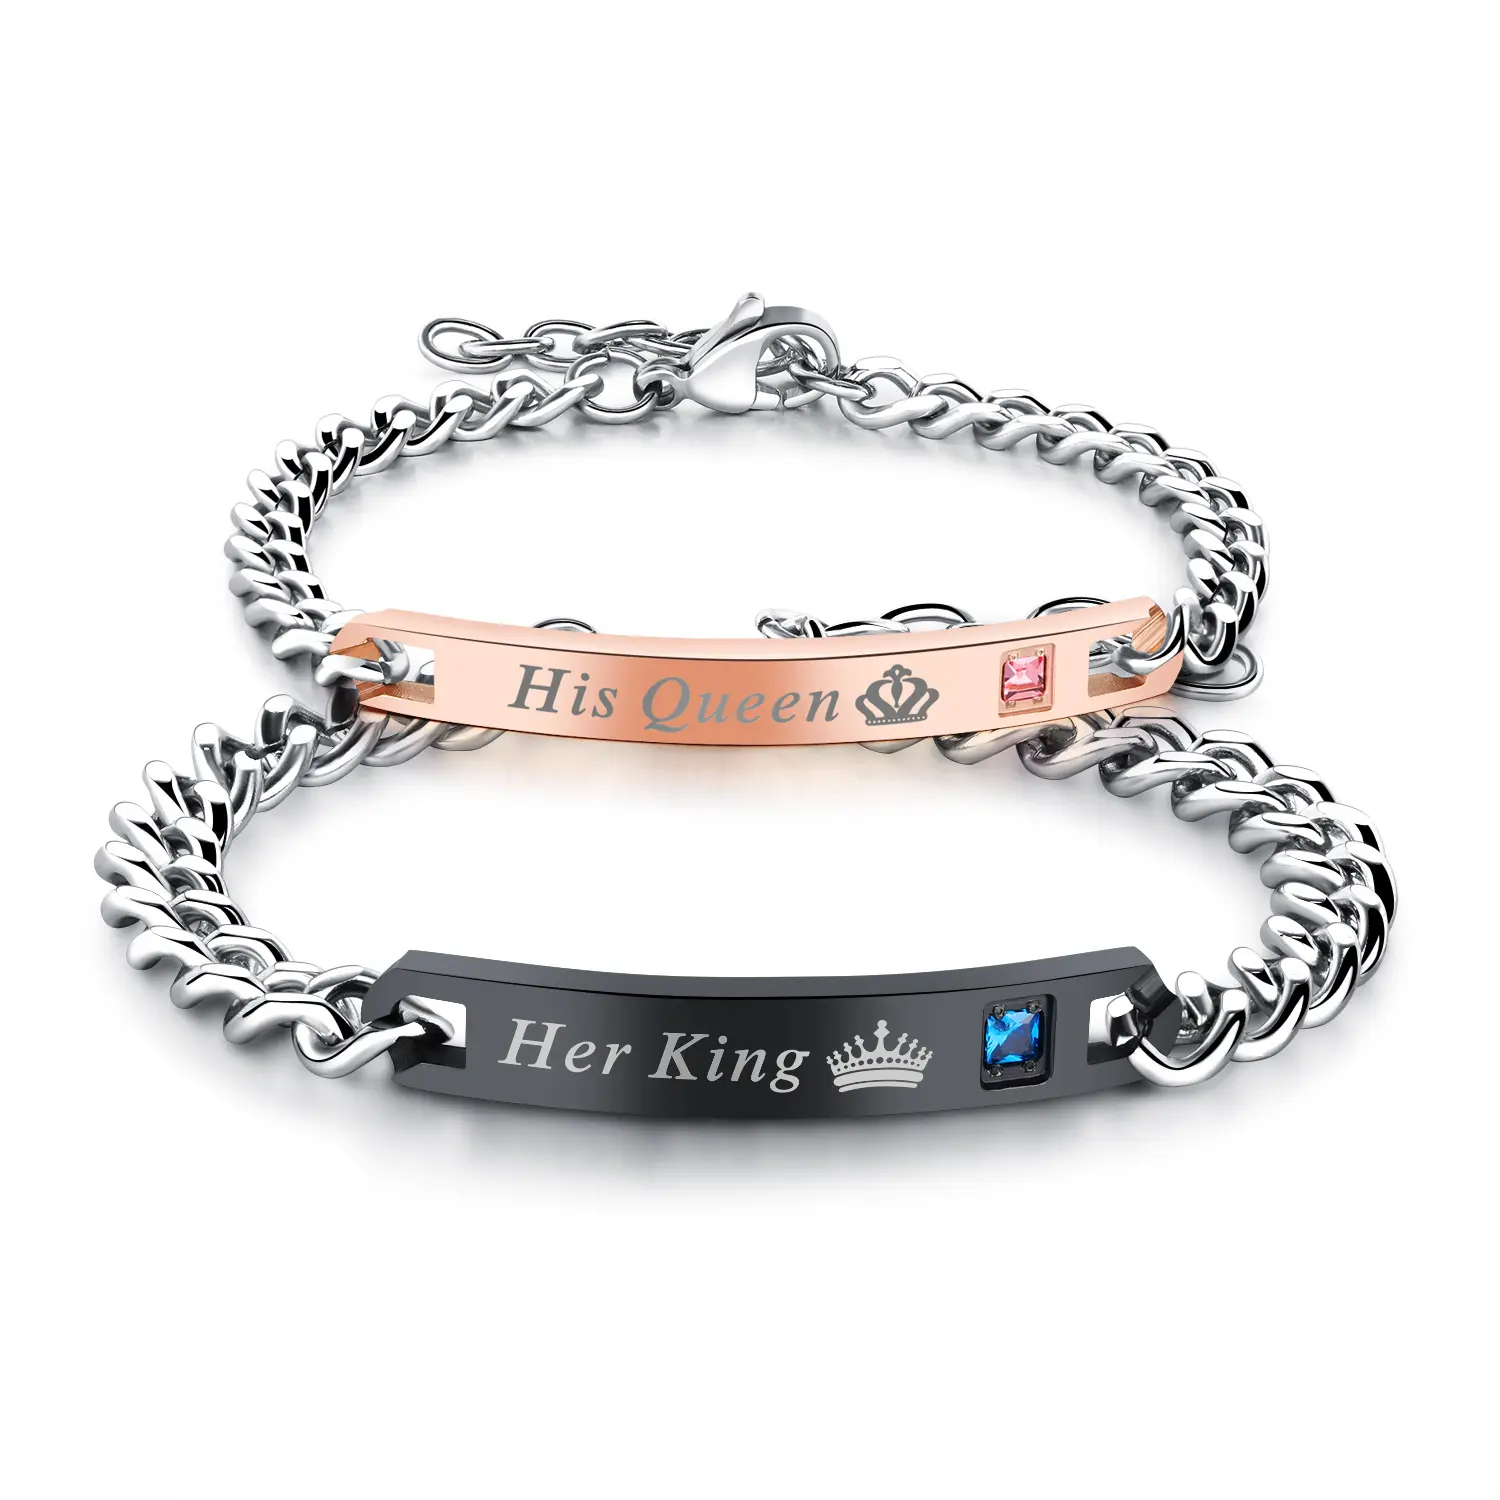 Gift for Lover His Queen Her King Stainless Steel Couple Bracelets for Women Men Jewelry Matching Set His Hers couple bracelet